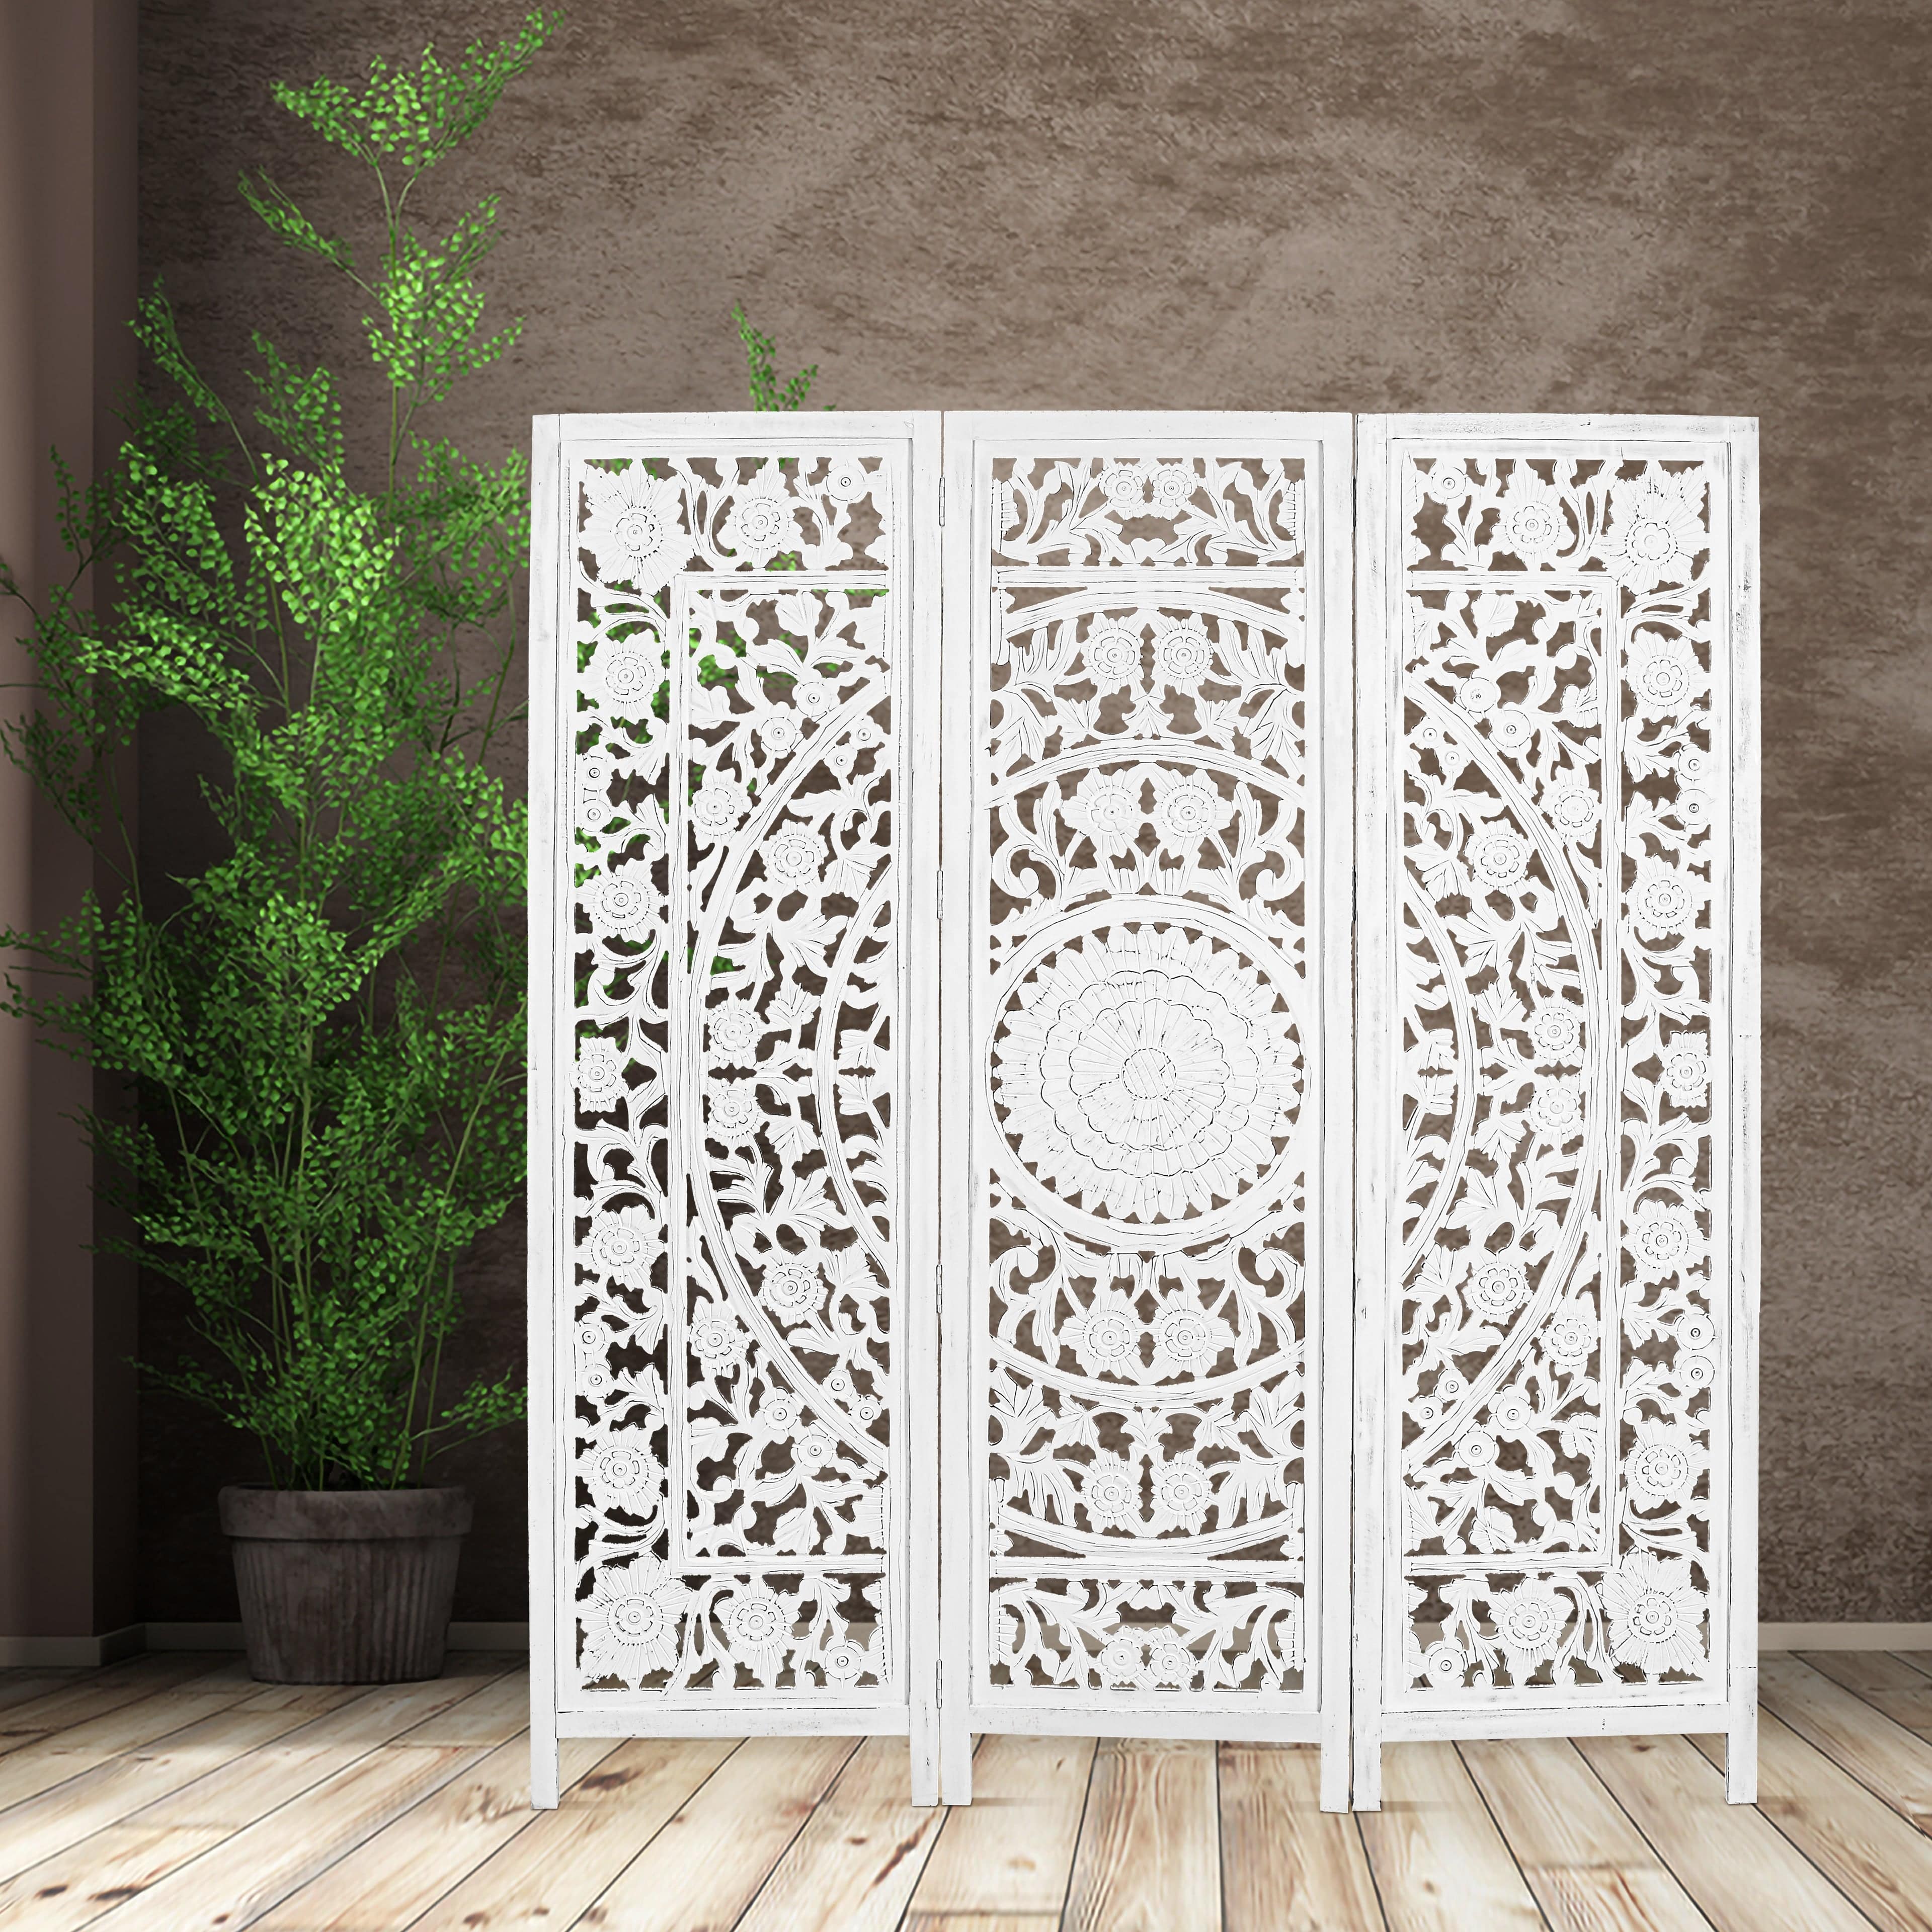 Create Privacy and Style with the Shoji Timber Wood Stand Room Divider - White